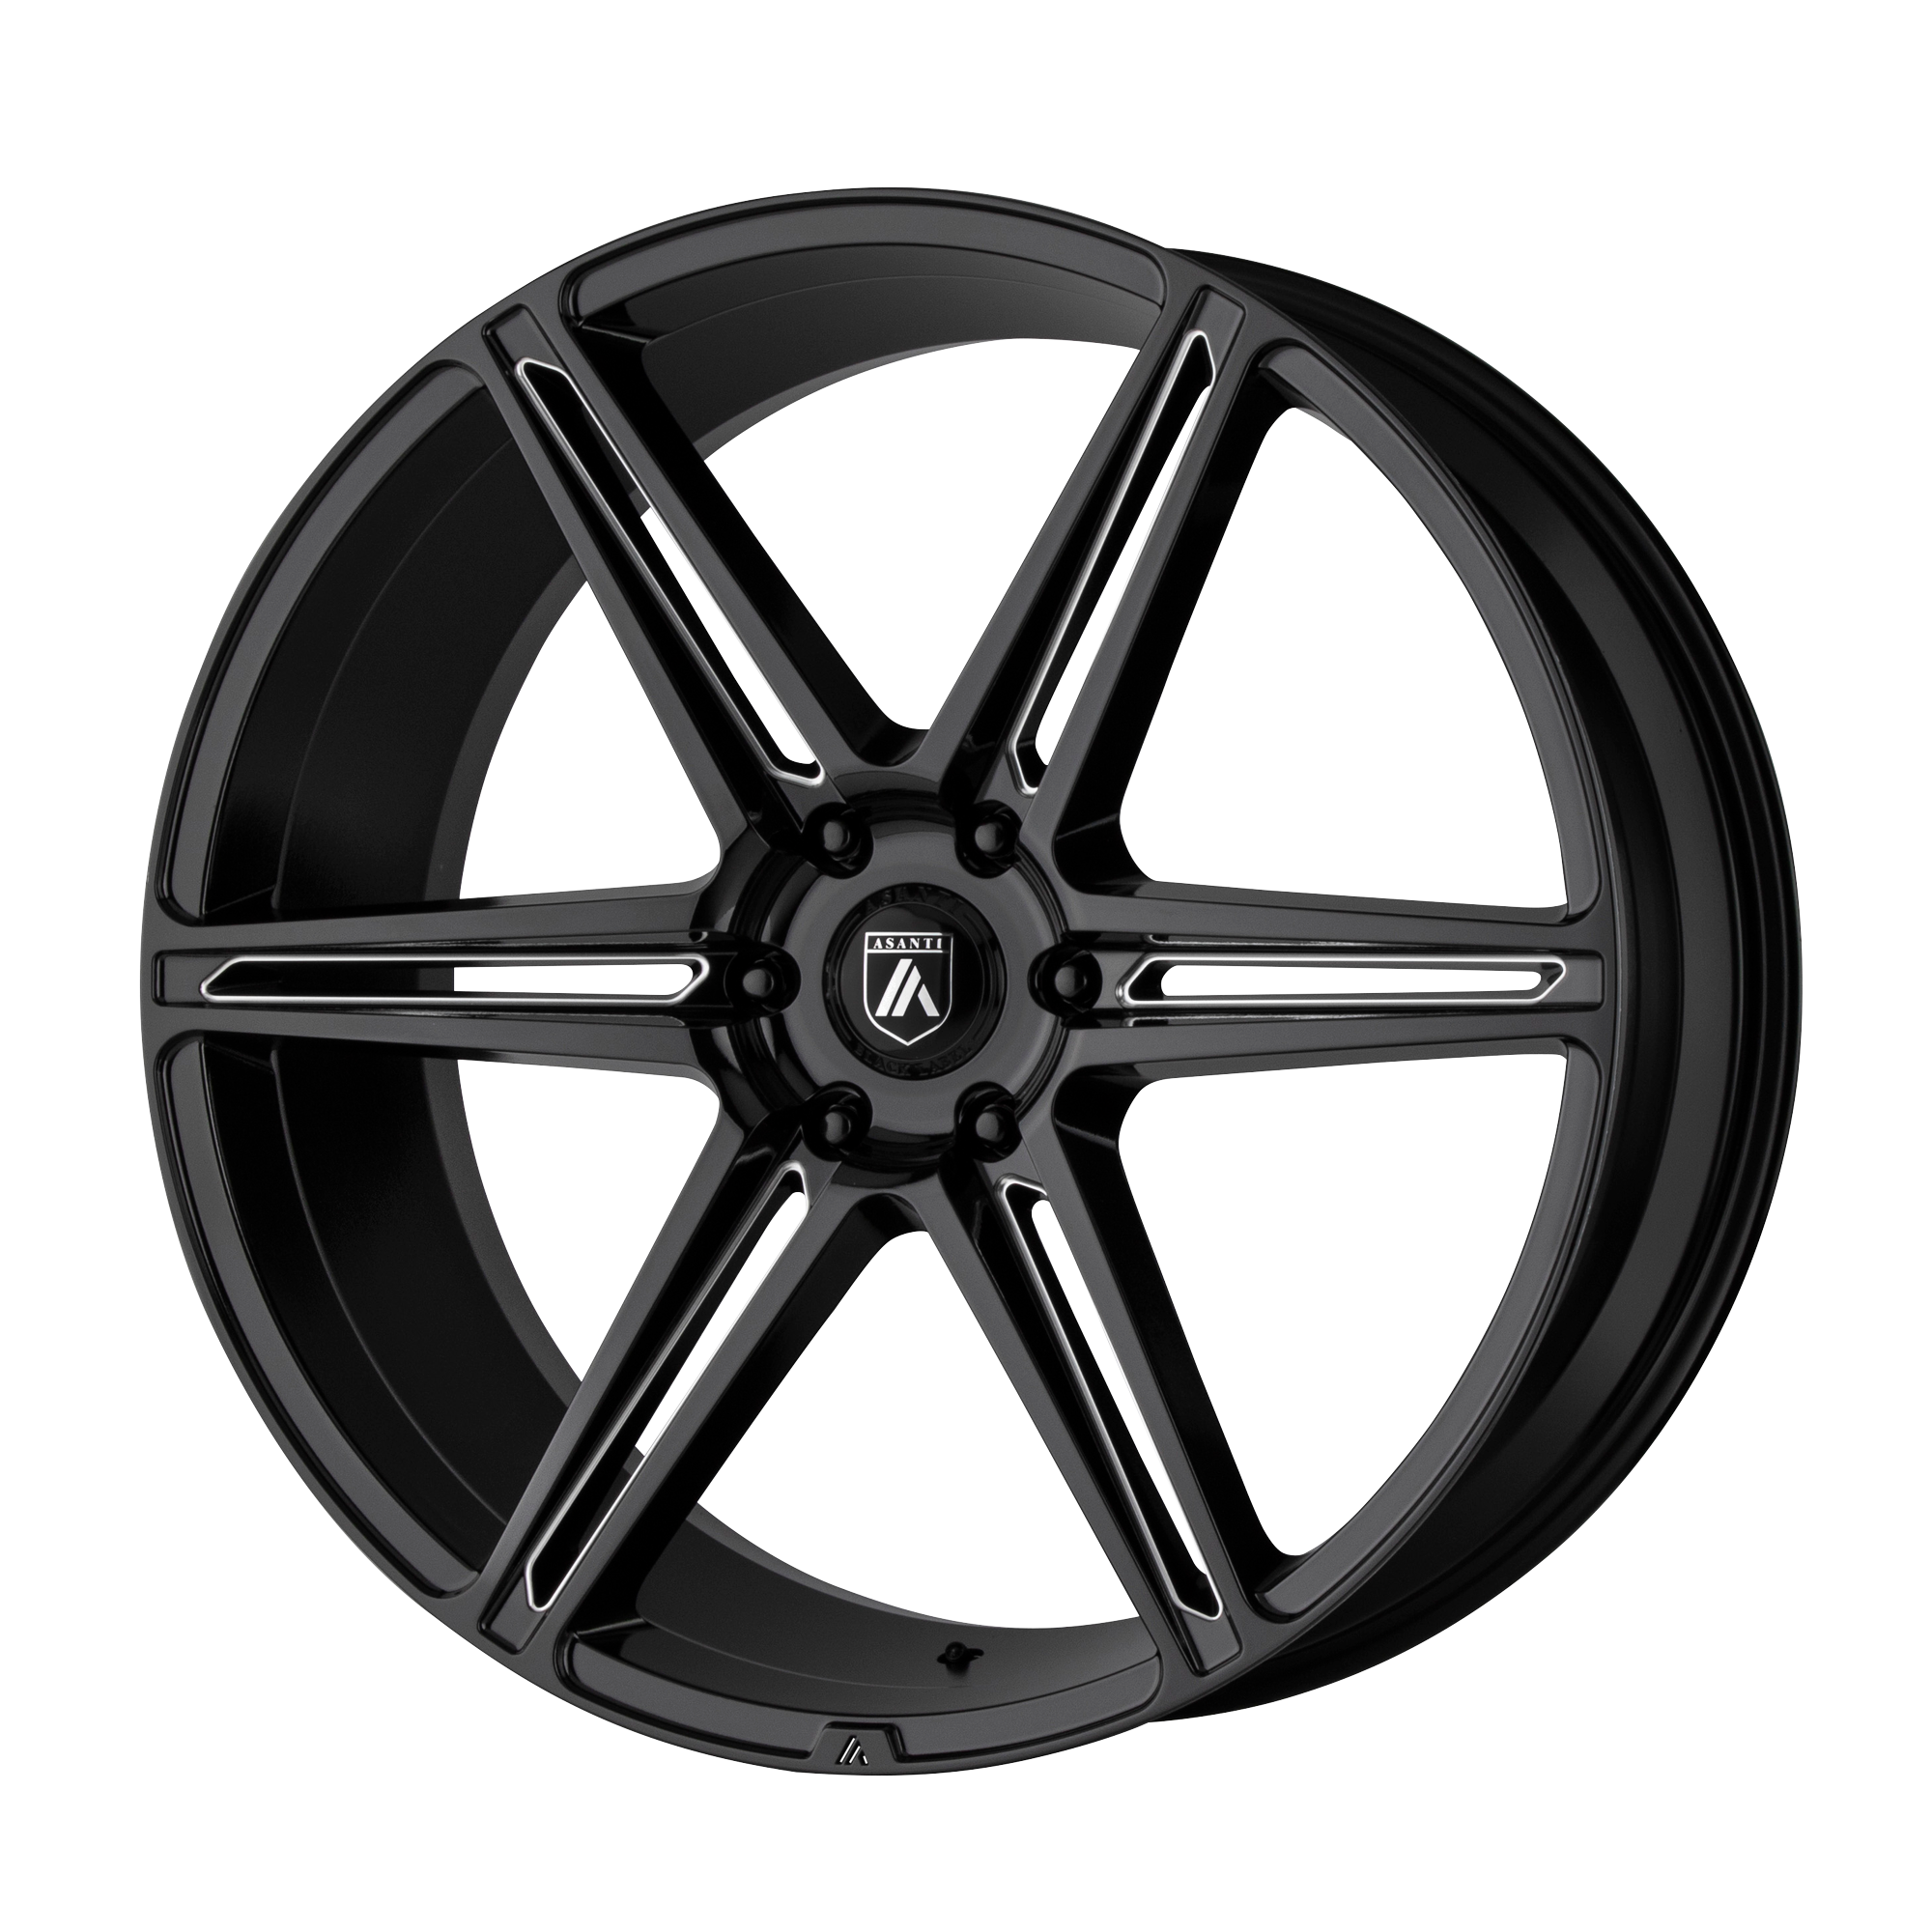 ALPHA 6 24x10 6x135.00 GLOSS BLACK MILLED (30 mm) - Tires and Engine Performance